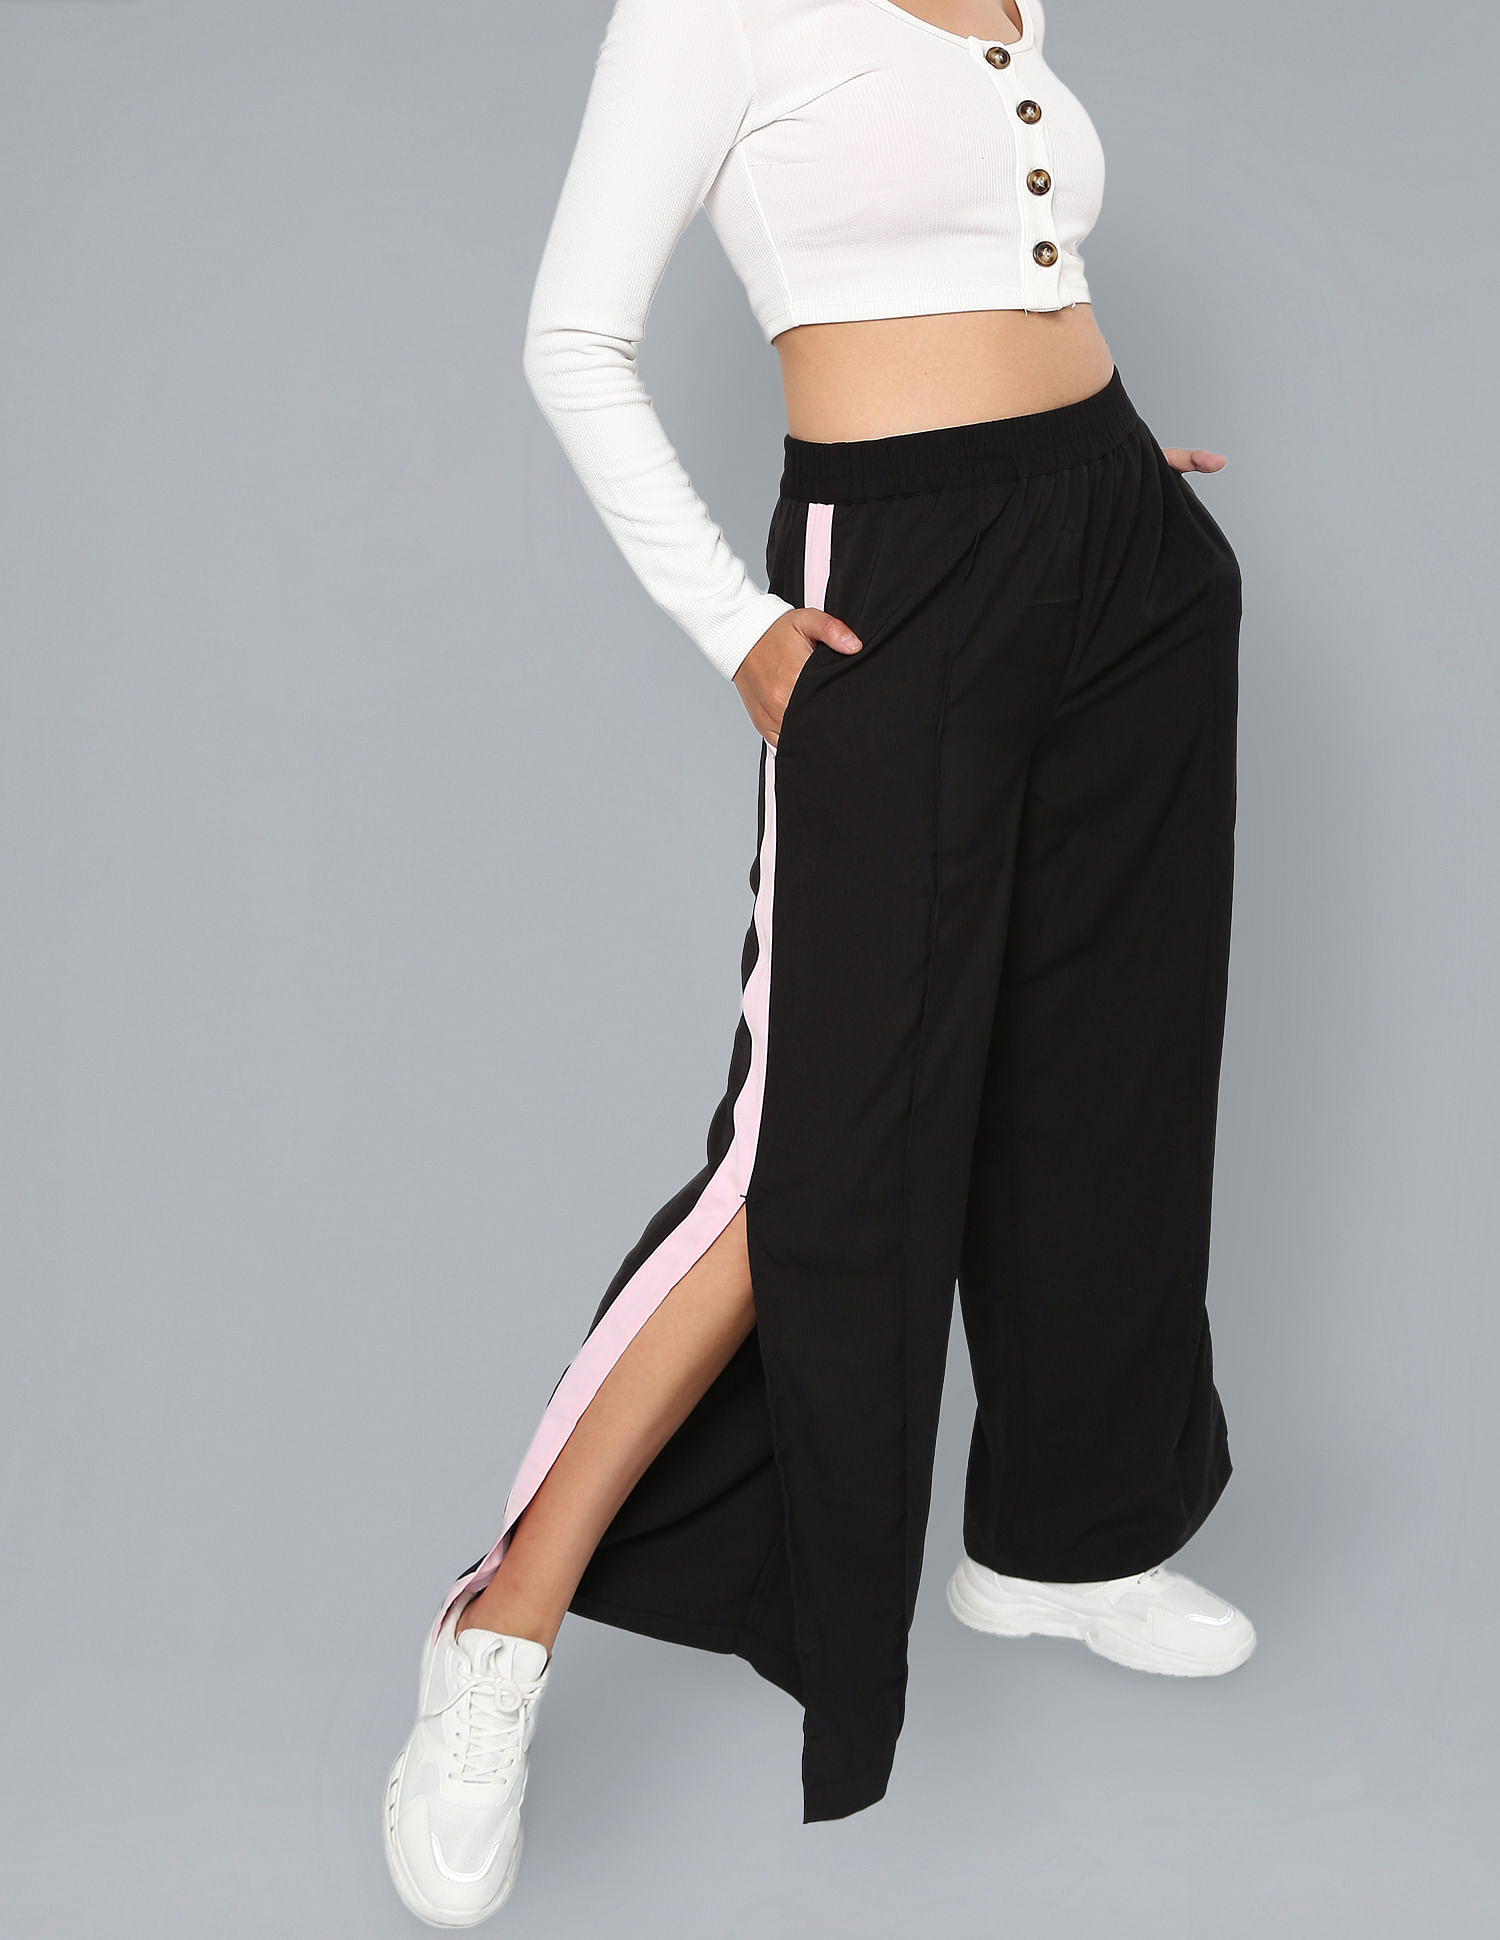 Mid Weight Trousers with Pockets - Merric - NZ Women's Fashion and Clothing  - nz fashion brands, nz fashion stores, women's fashion brands, women's  fashion nz, Fashion retail shops, Fashion retail shops